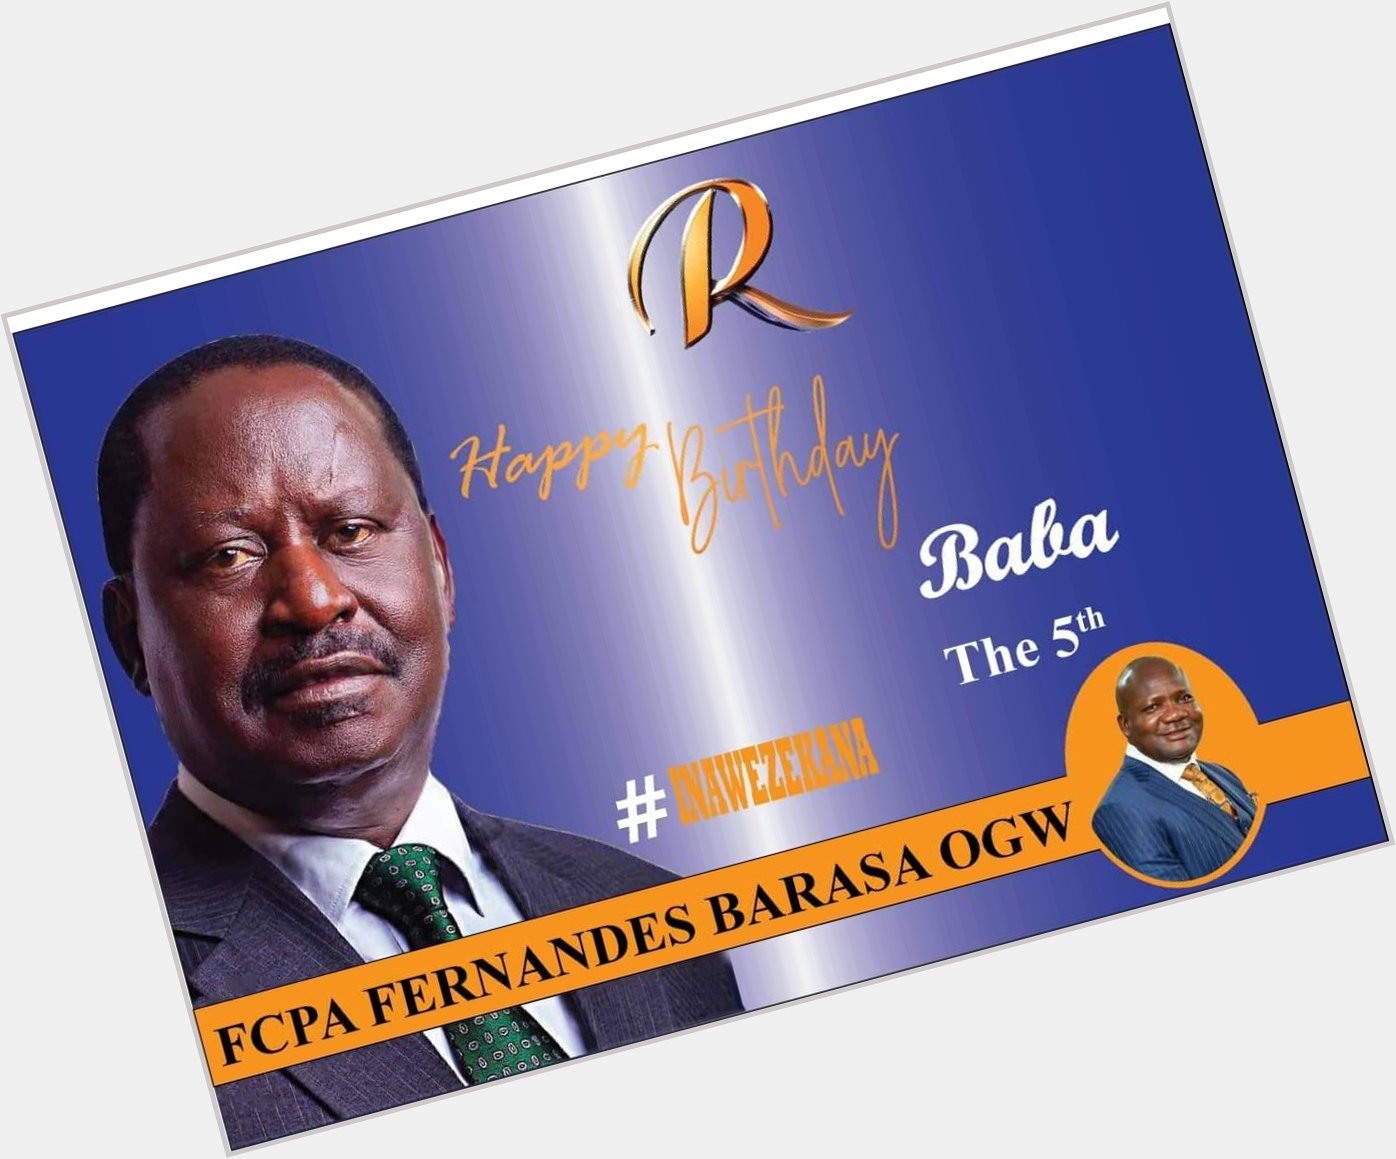 Happy birthday the 5th, Raila Odinga.
Your forthcoming win is a win for democracy, Sanity and unity of our country 